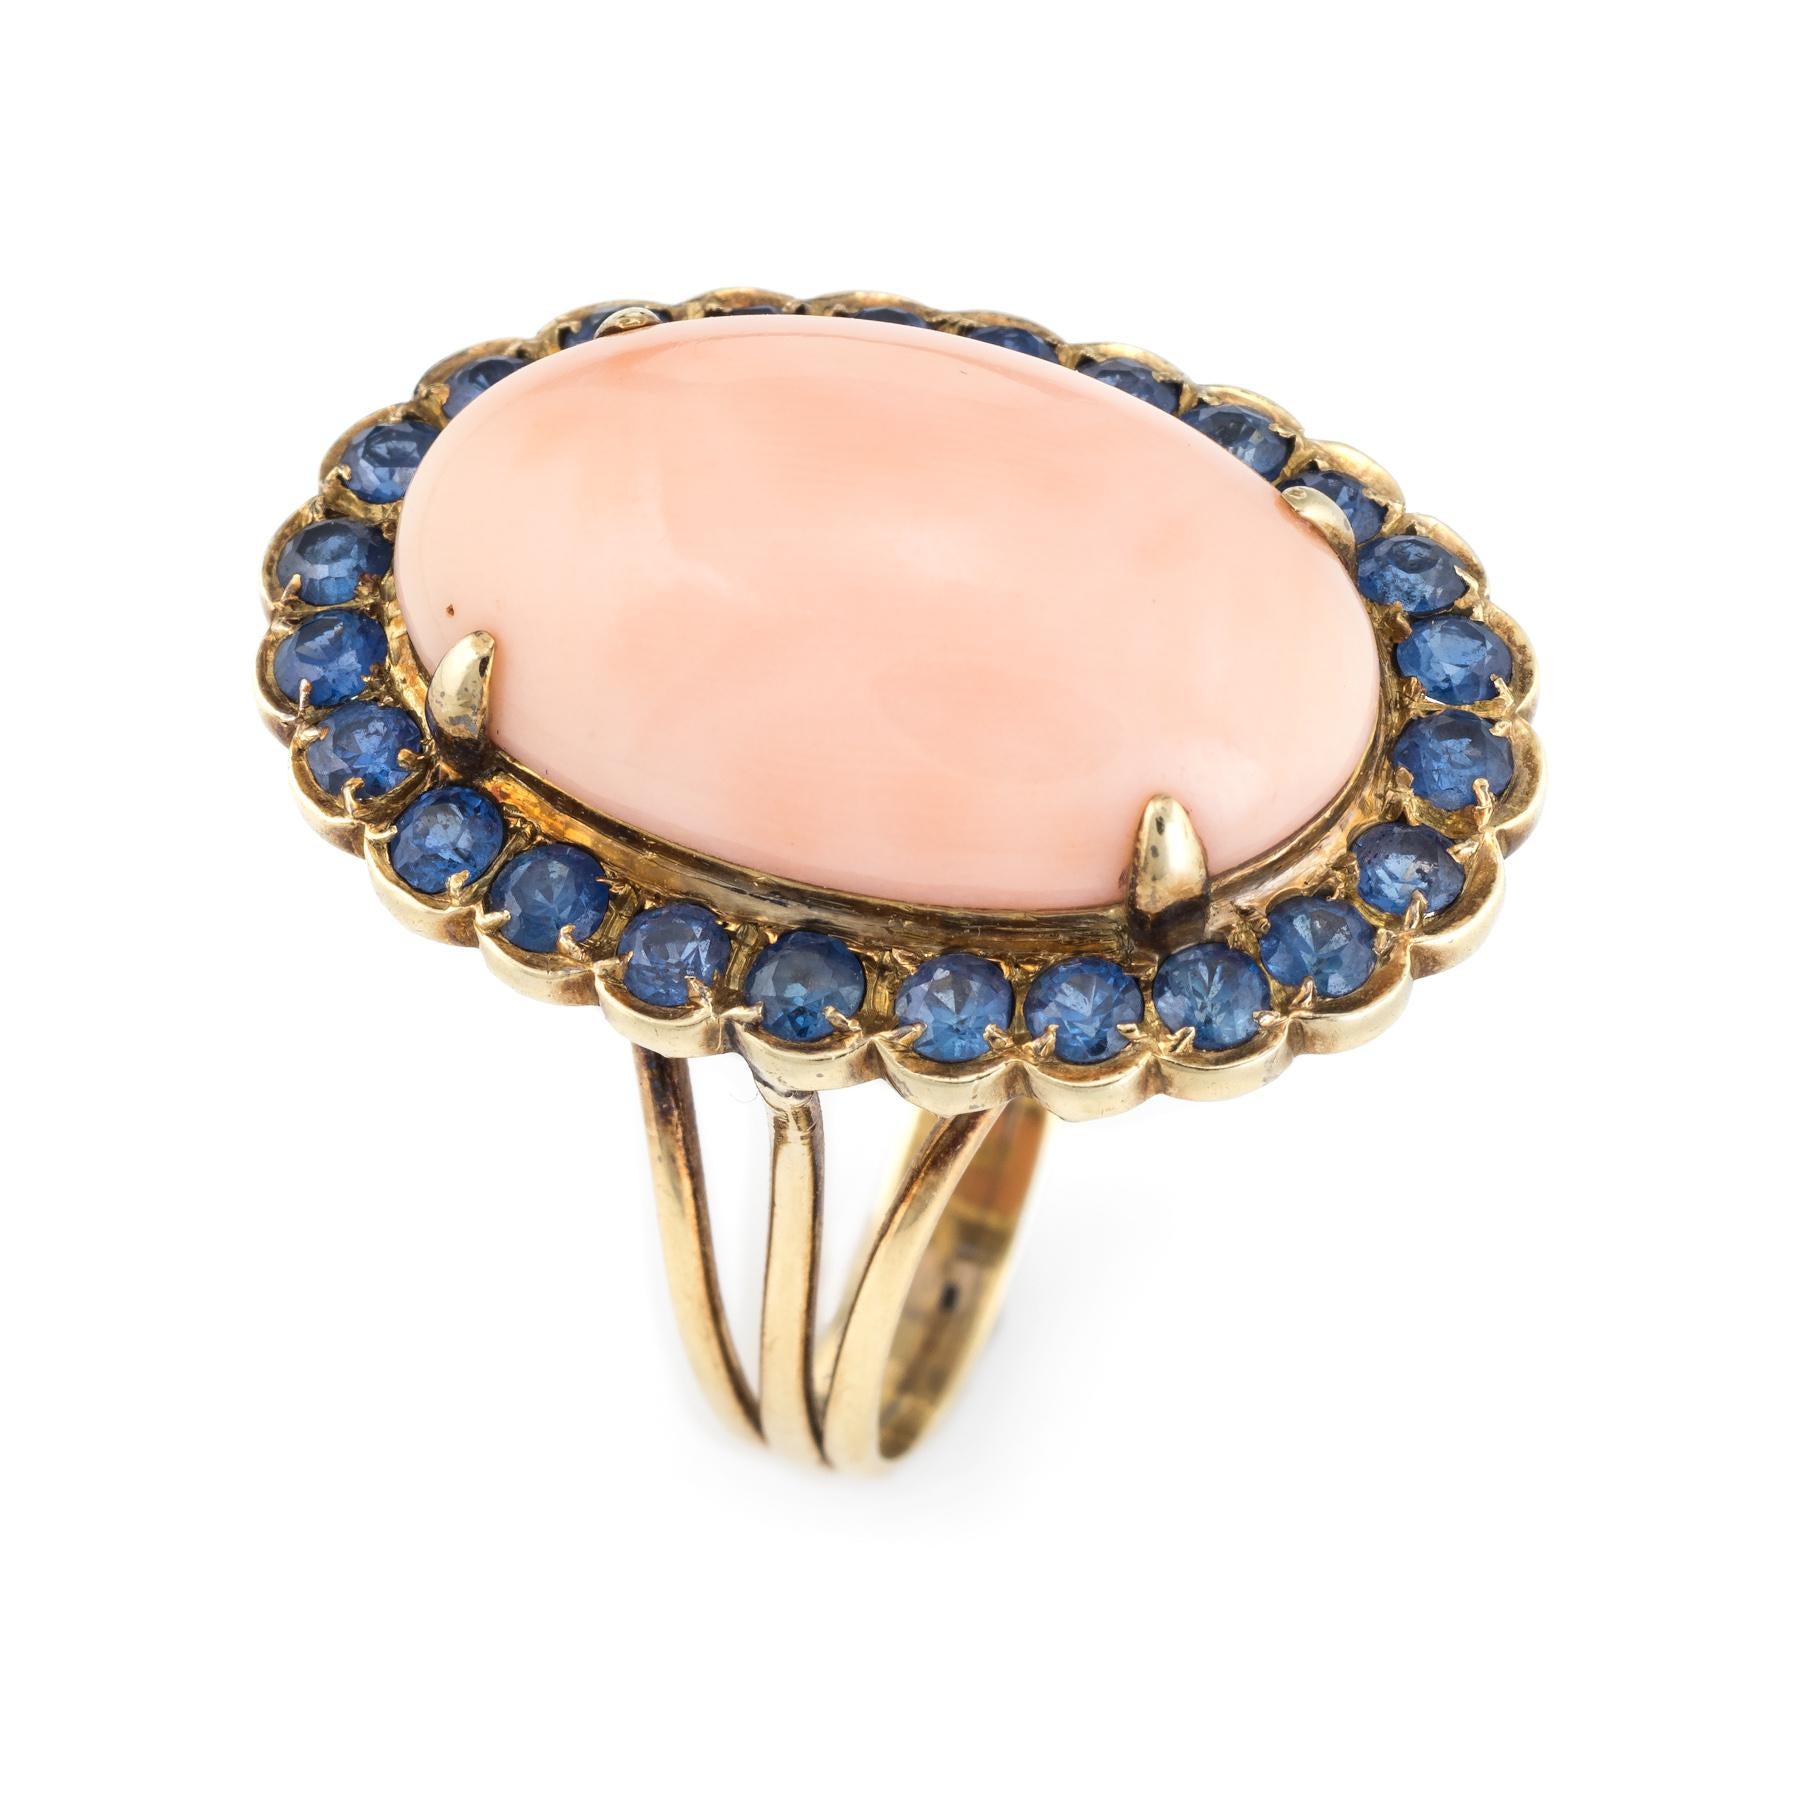 Oval Cut Angel Skin Coral Sapphire Ring Vintage 14 Karat Gold Oval Cocktail Jewelry 7